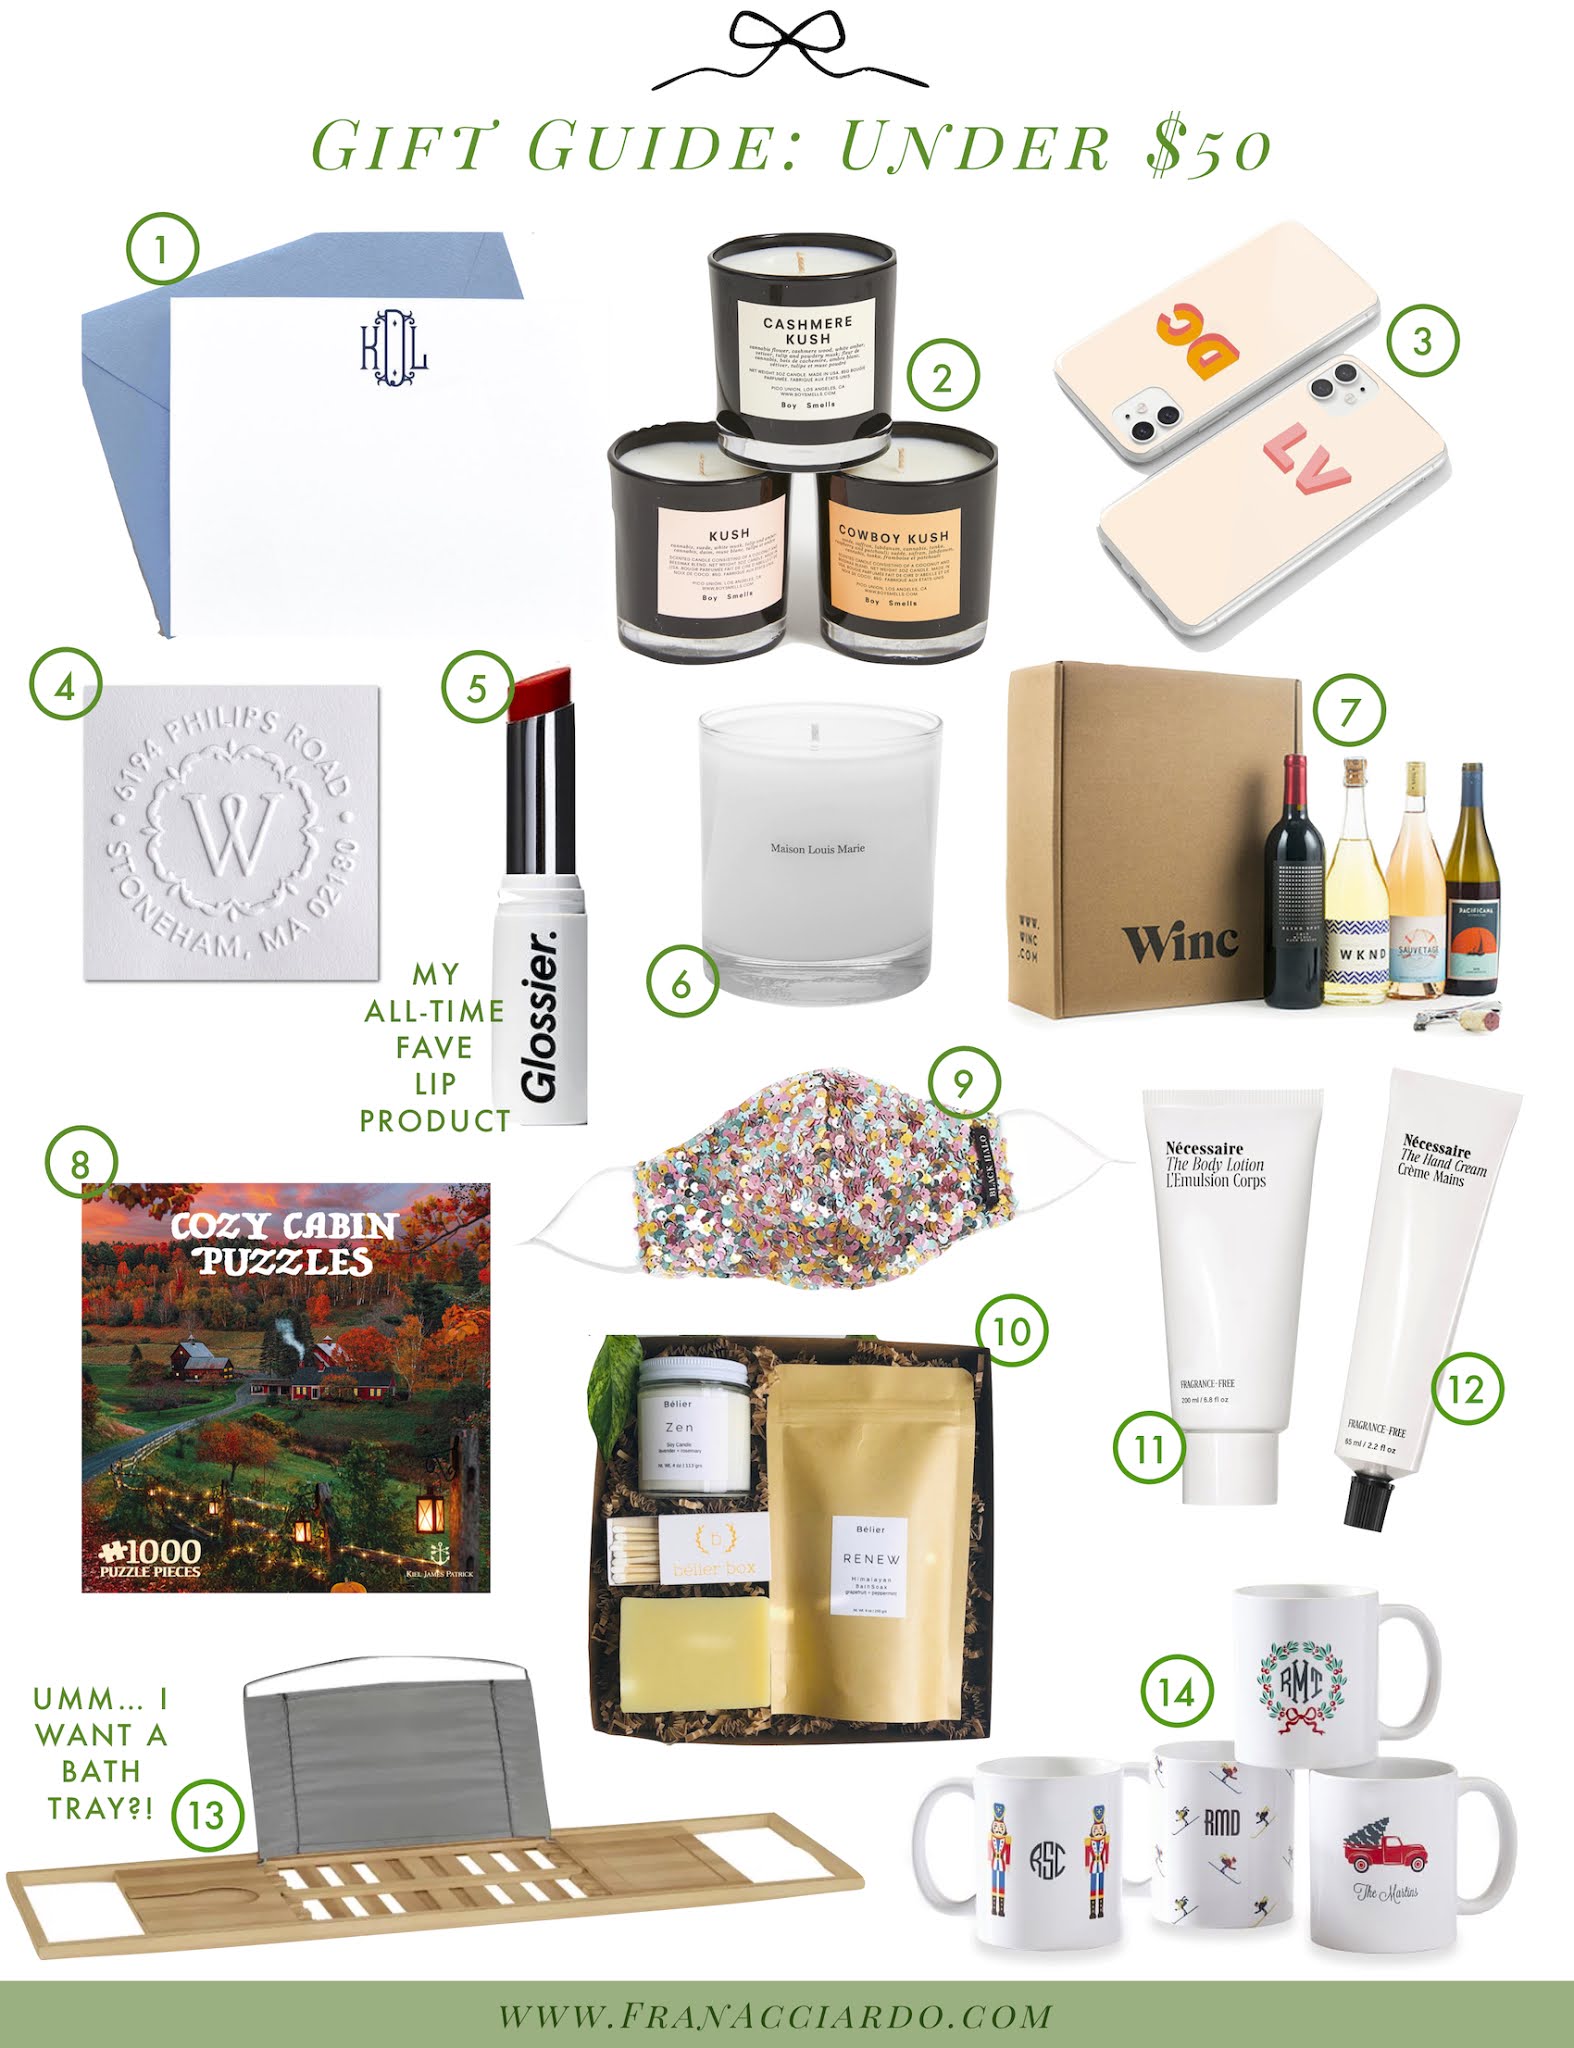 Gift Guide  For Her Under $50 - A Thoughtful Place